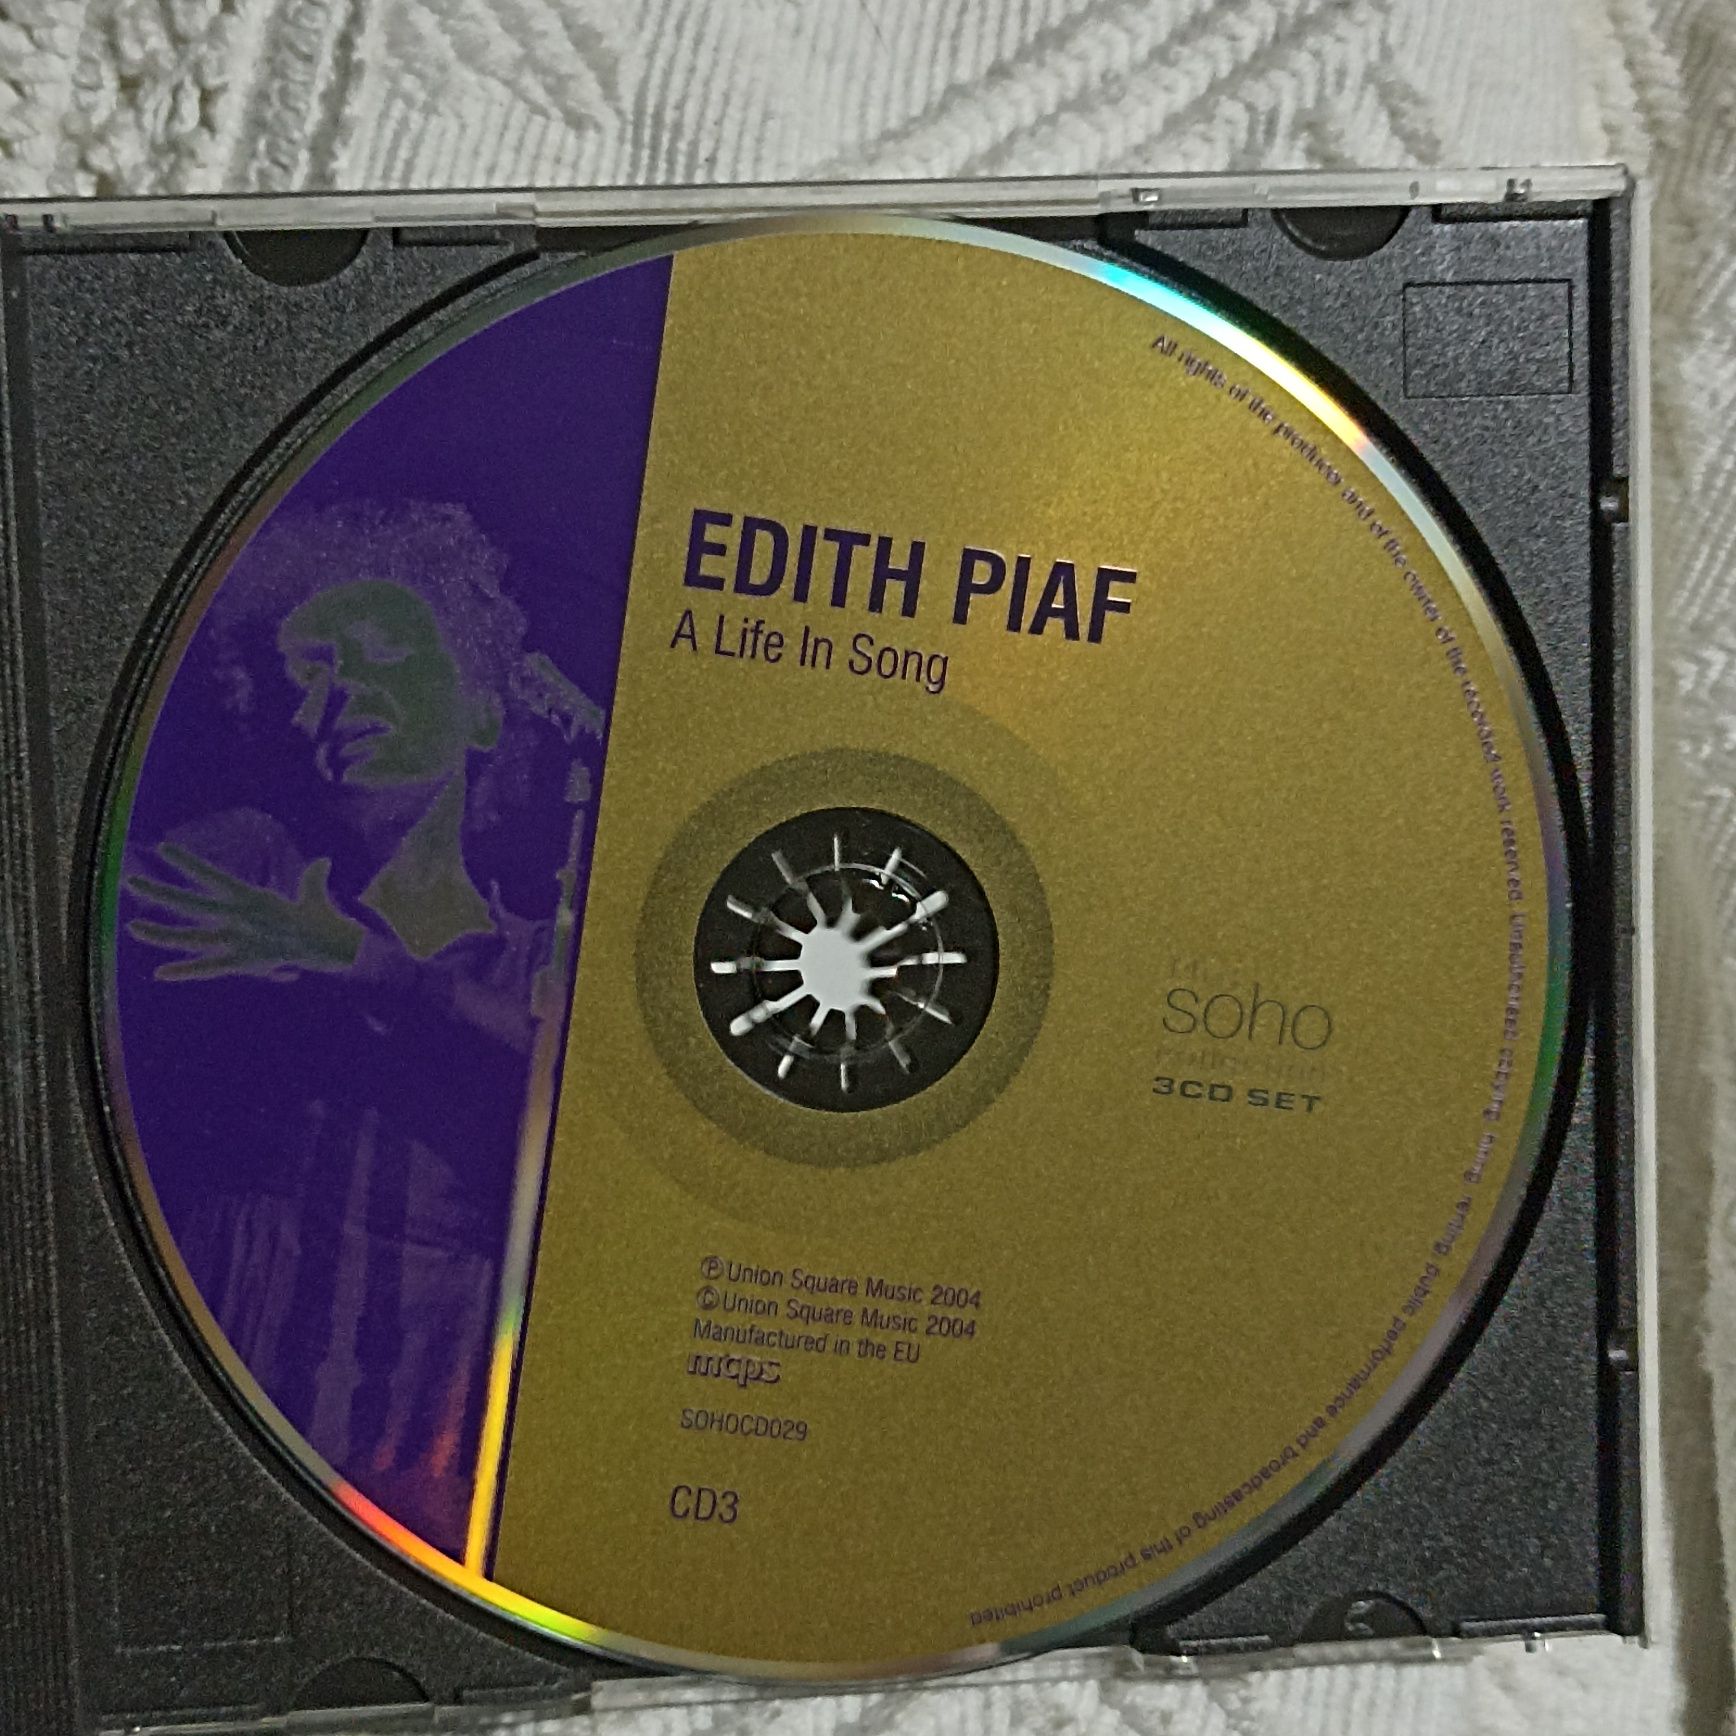 Edith Piaf A Life In Song 3CD Deluxe Edition